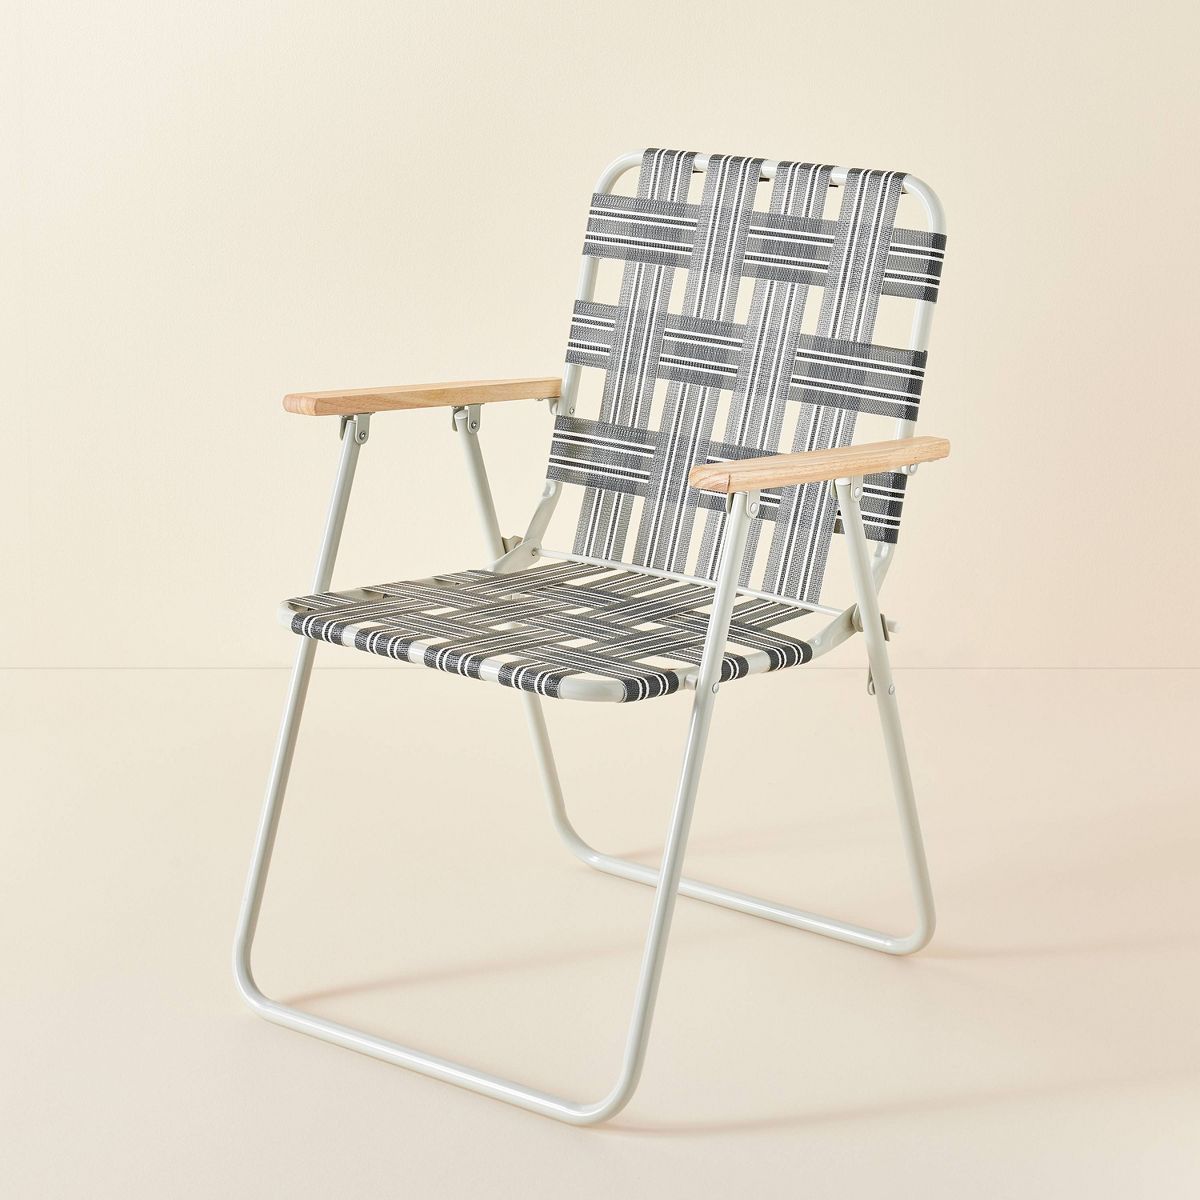 Folding Lawn Chair - Blue/Gray Plaid - Hearth & Hand™ with Magnolia | Target